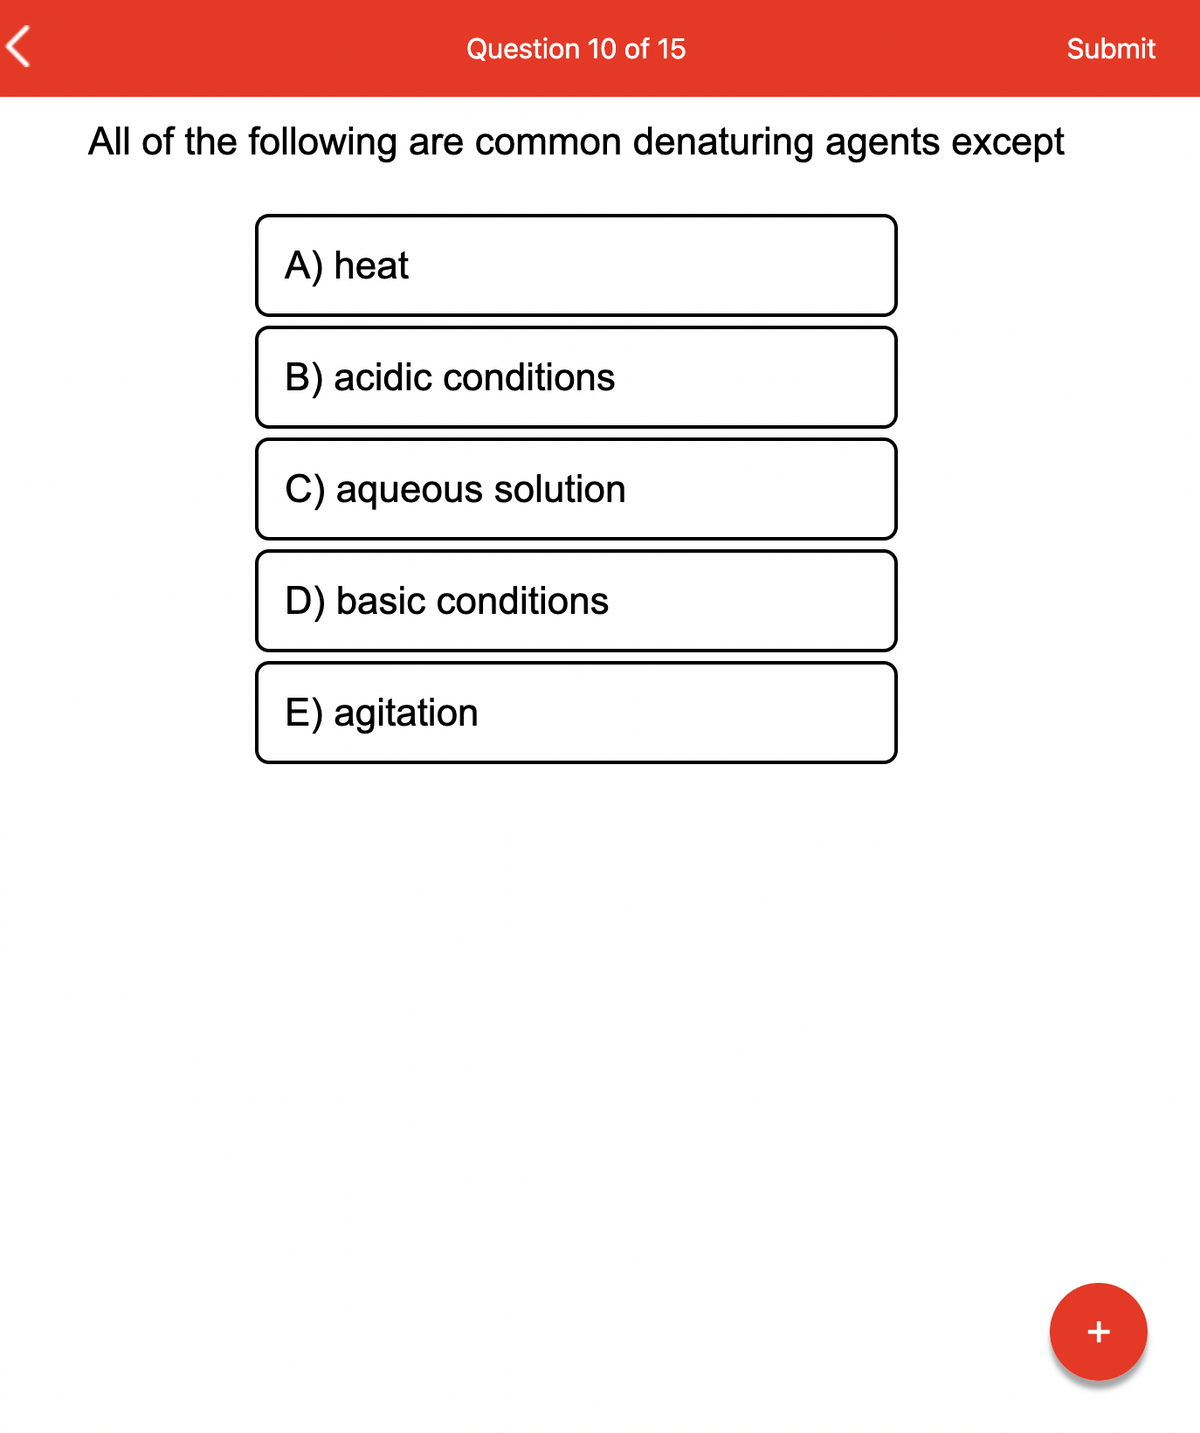 Question 10 of 15
A) heat
All of the following are common denaturing agents except
B) acidic conditions
aqueous solution
D) basic conditions
Submit
E) agitation
+